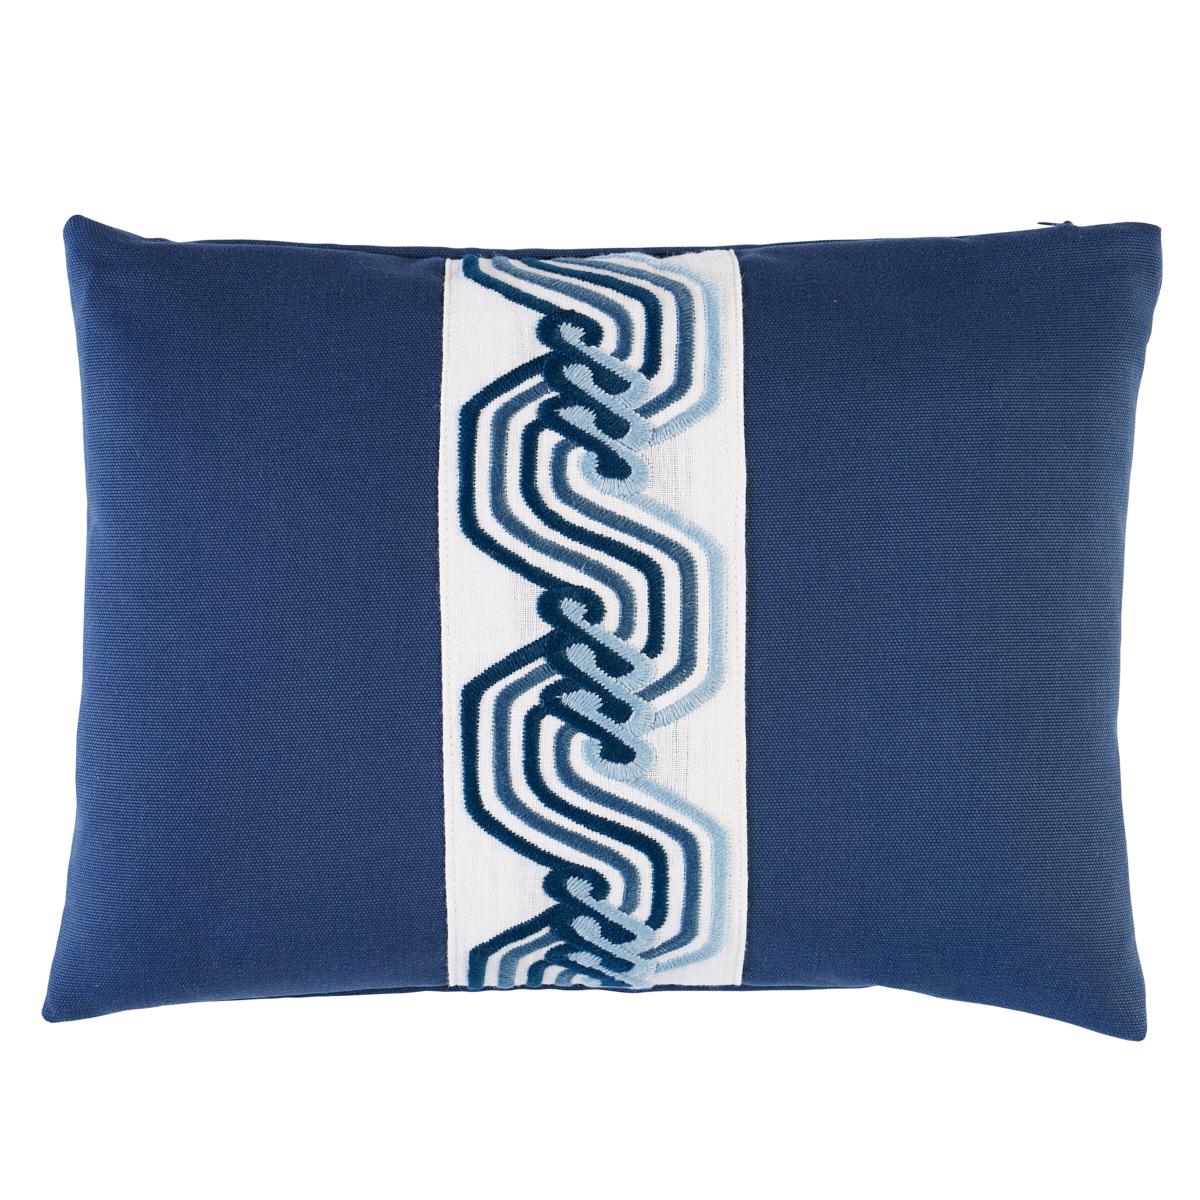 The Twist Embroidered Pillow 16" 